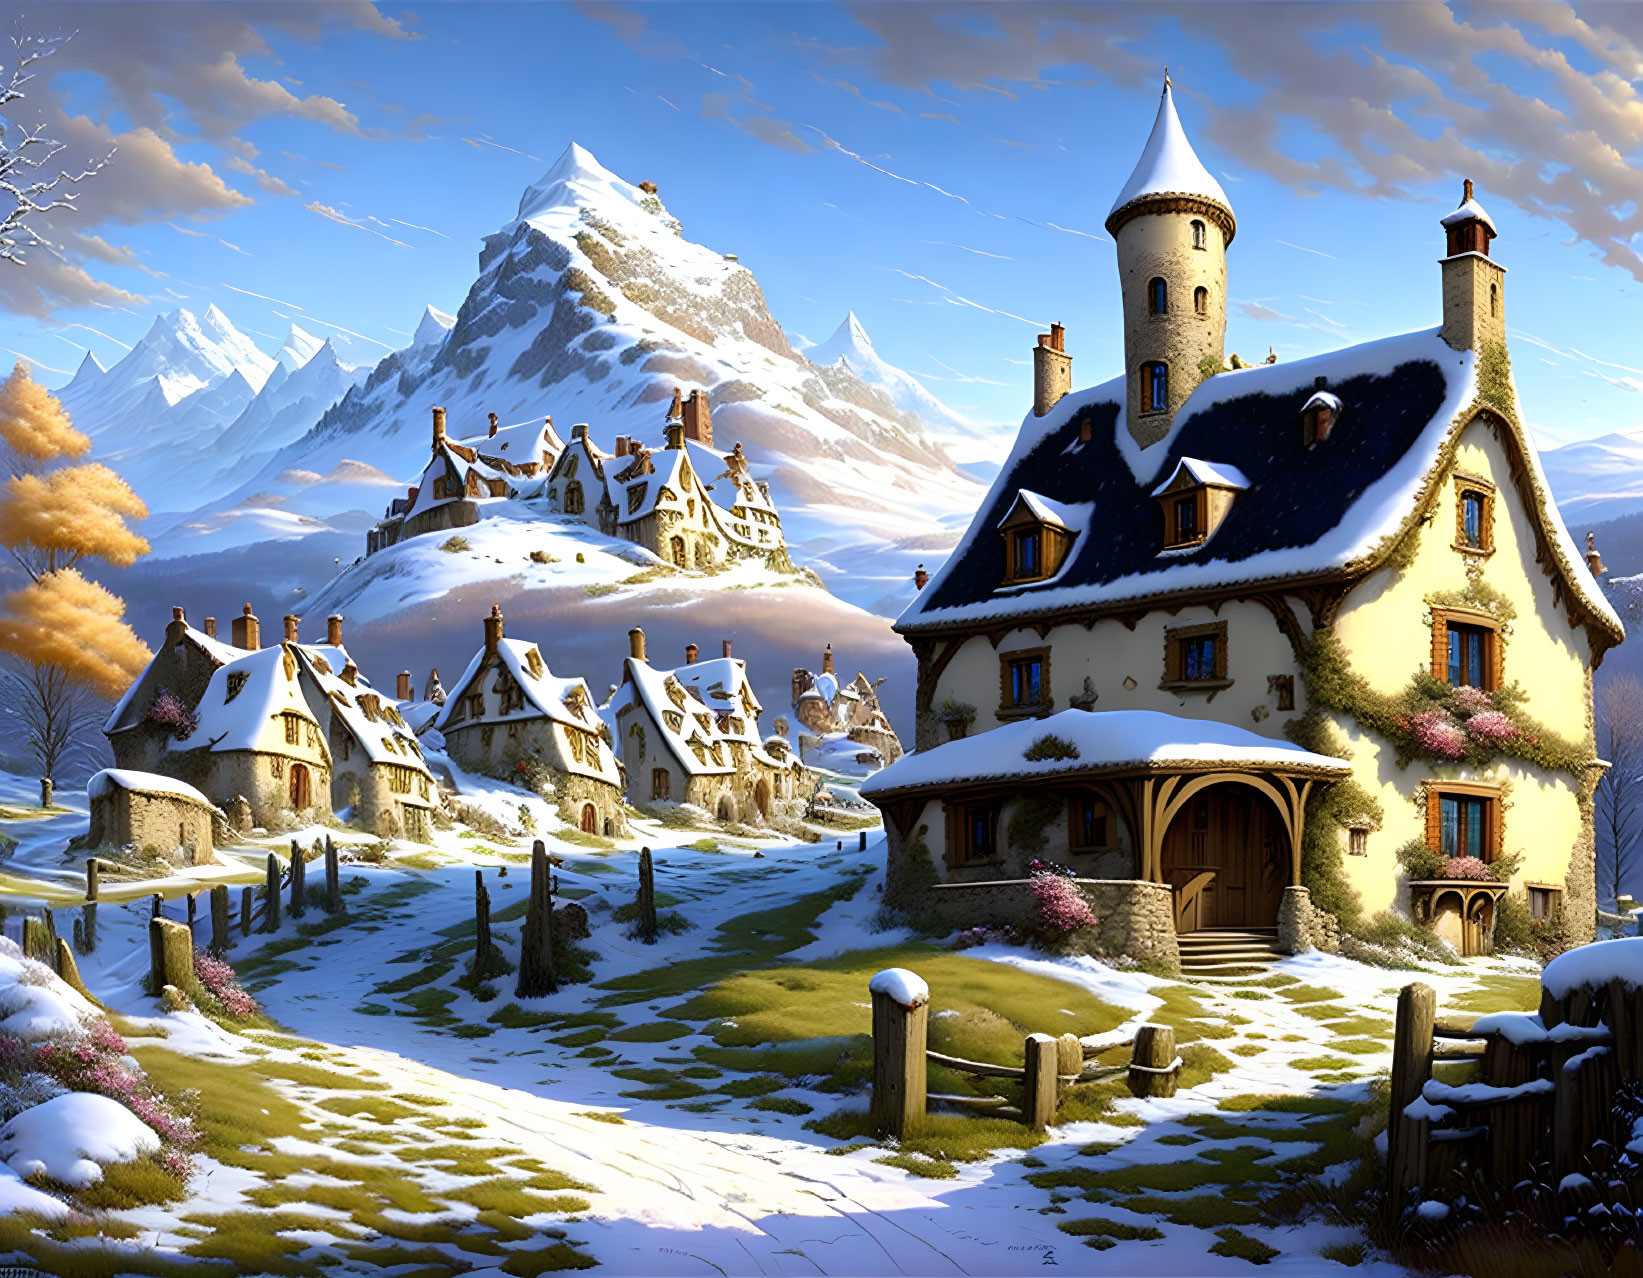 Snow-capped roofs in village with castle and mountains.